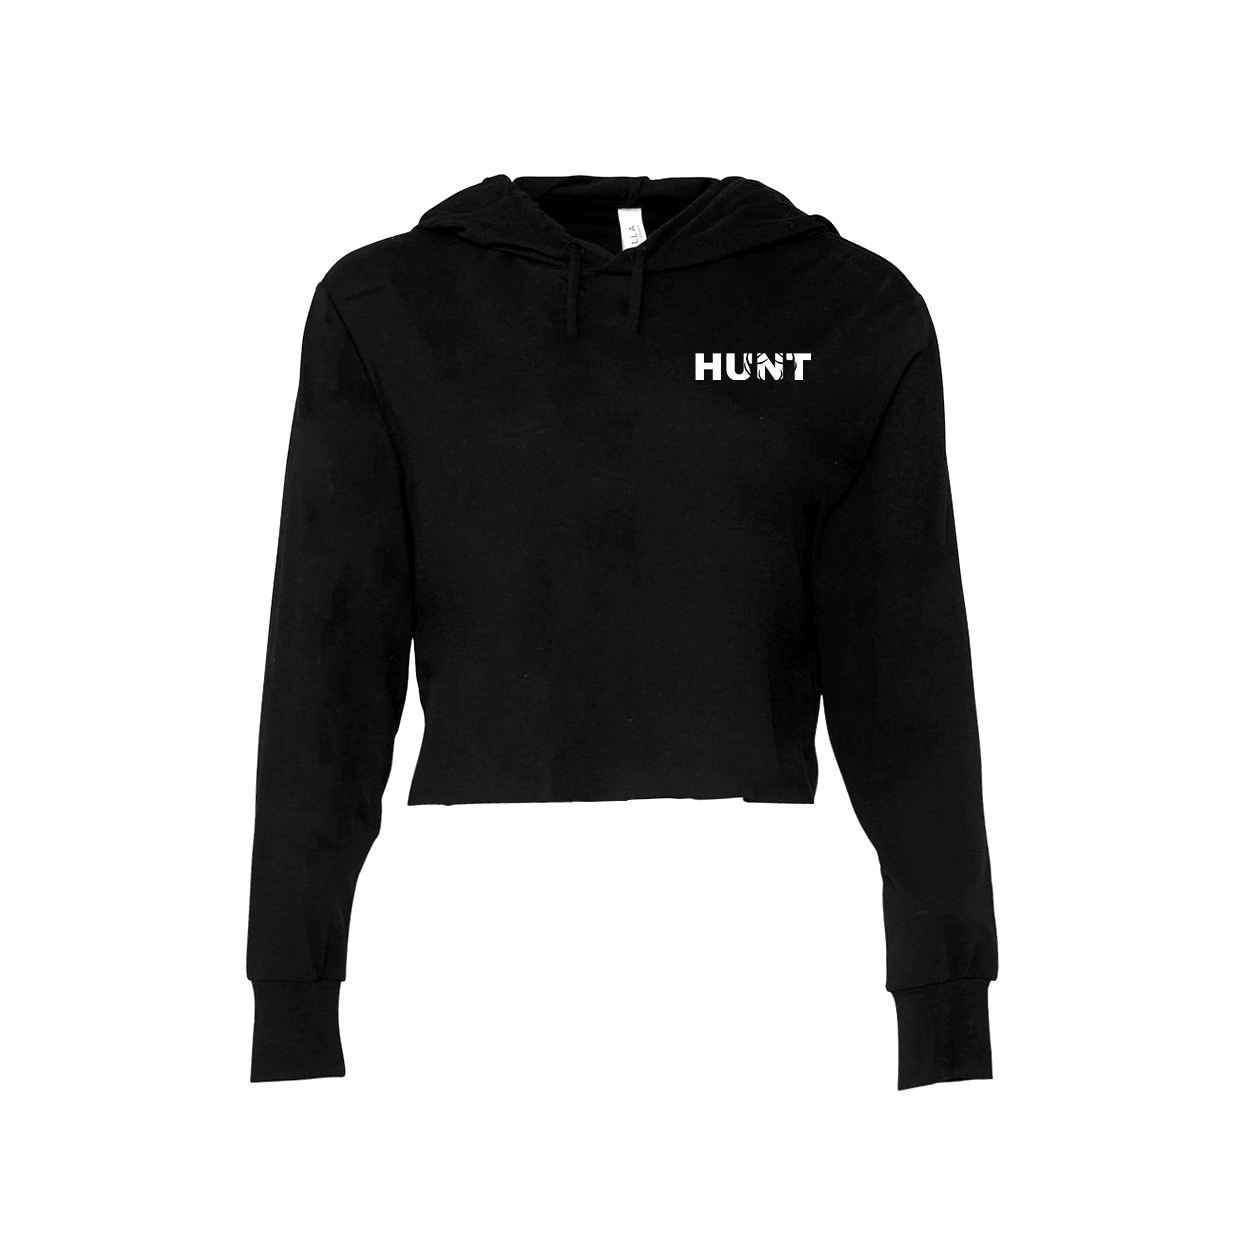 Hunt Rack Logo Night Out Womens Long Sleeve Cropped Hooded Tee Black 